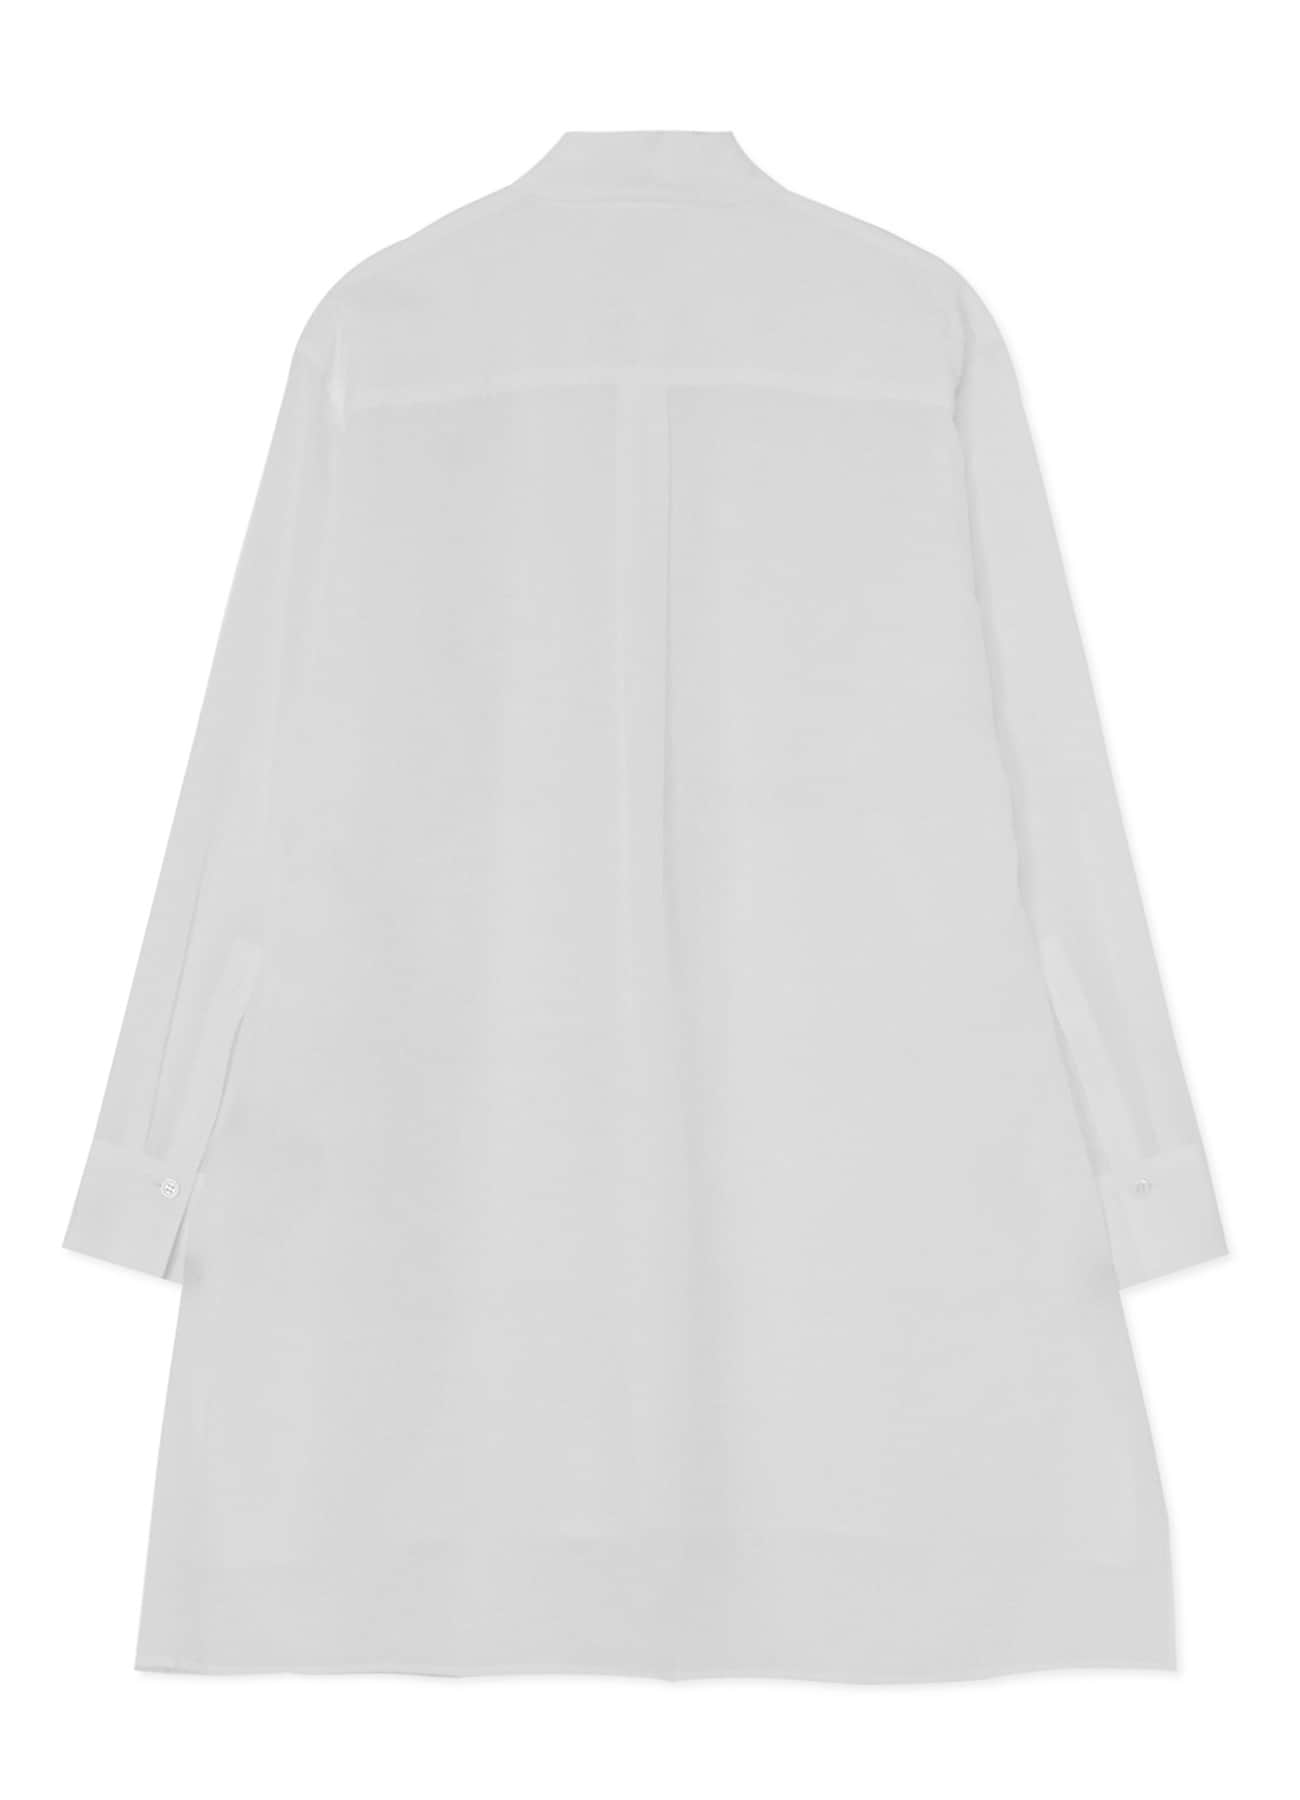 TENCEL ROOMY BLOUSE WITH OVERLAPPING PLACKET